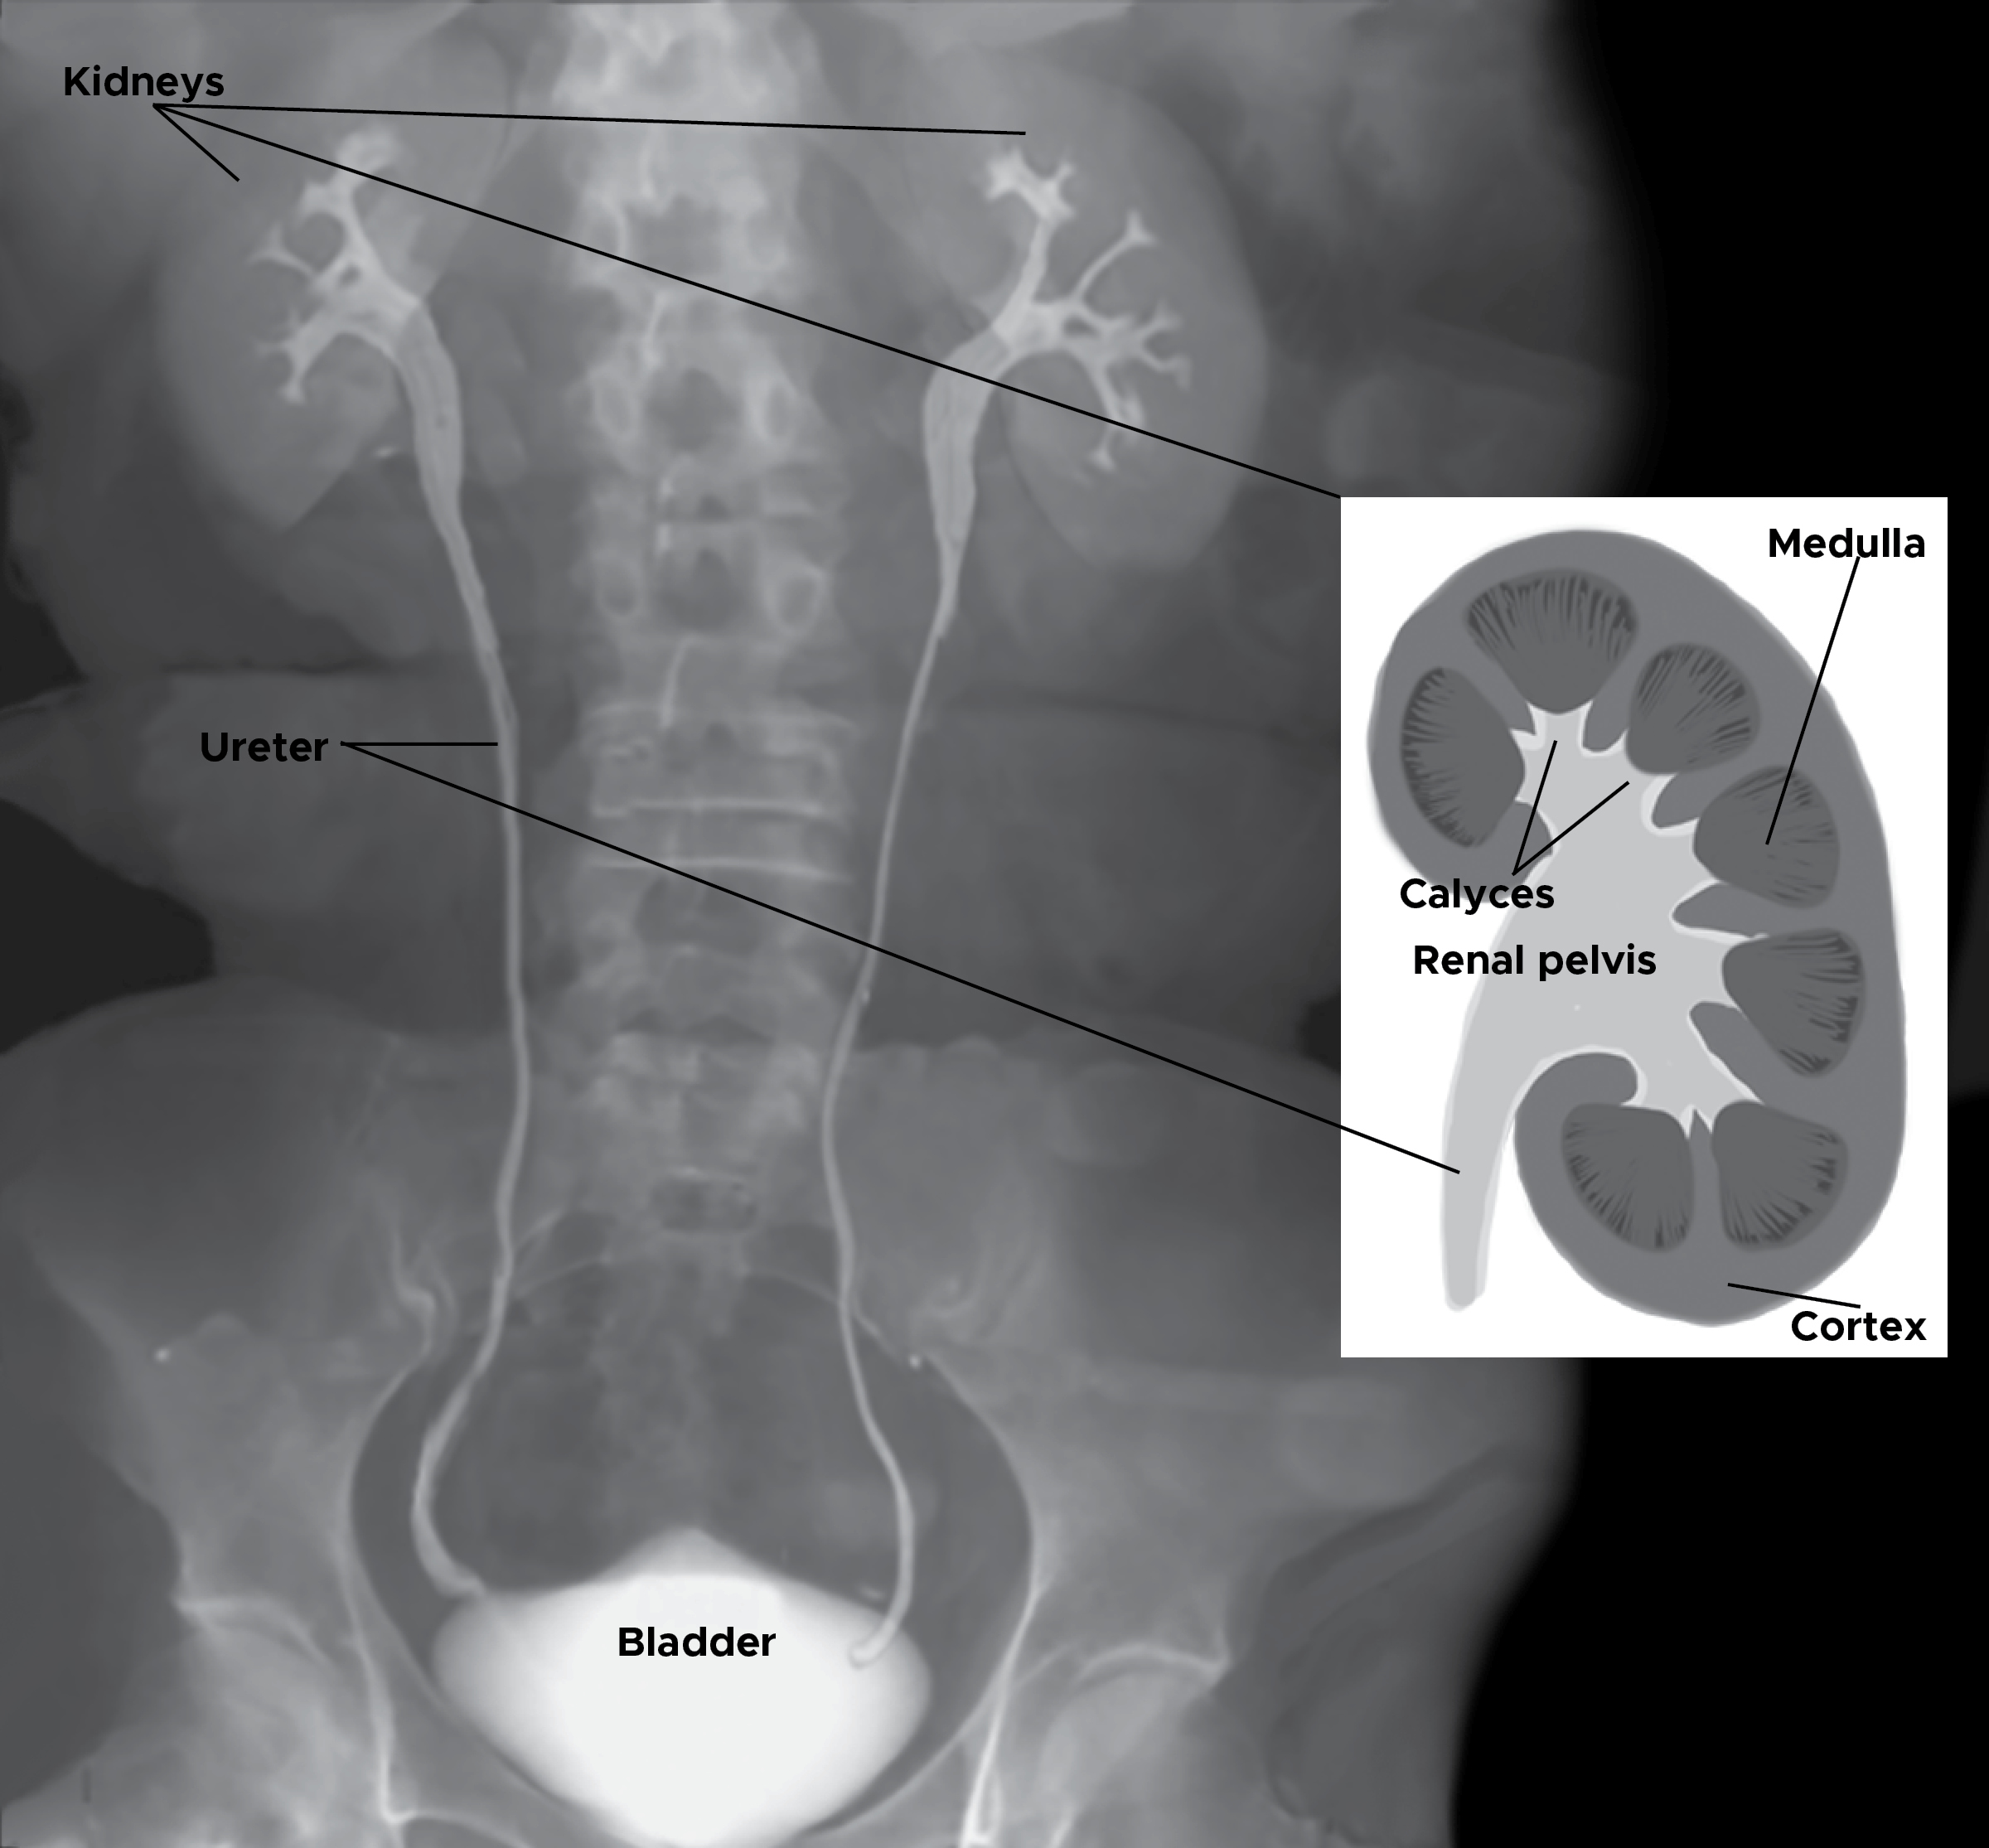 Labeled x-ray image and illustration of kidneys, ureter, bladder and abdomen.